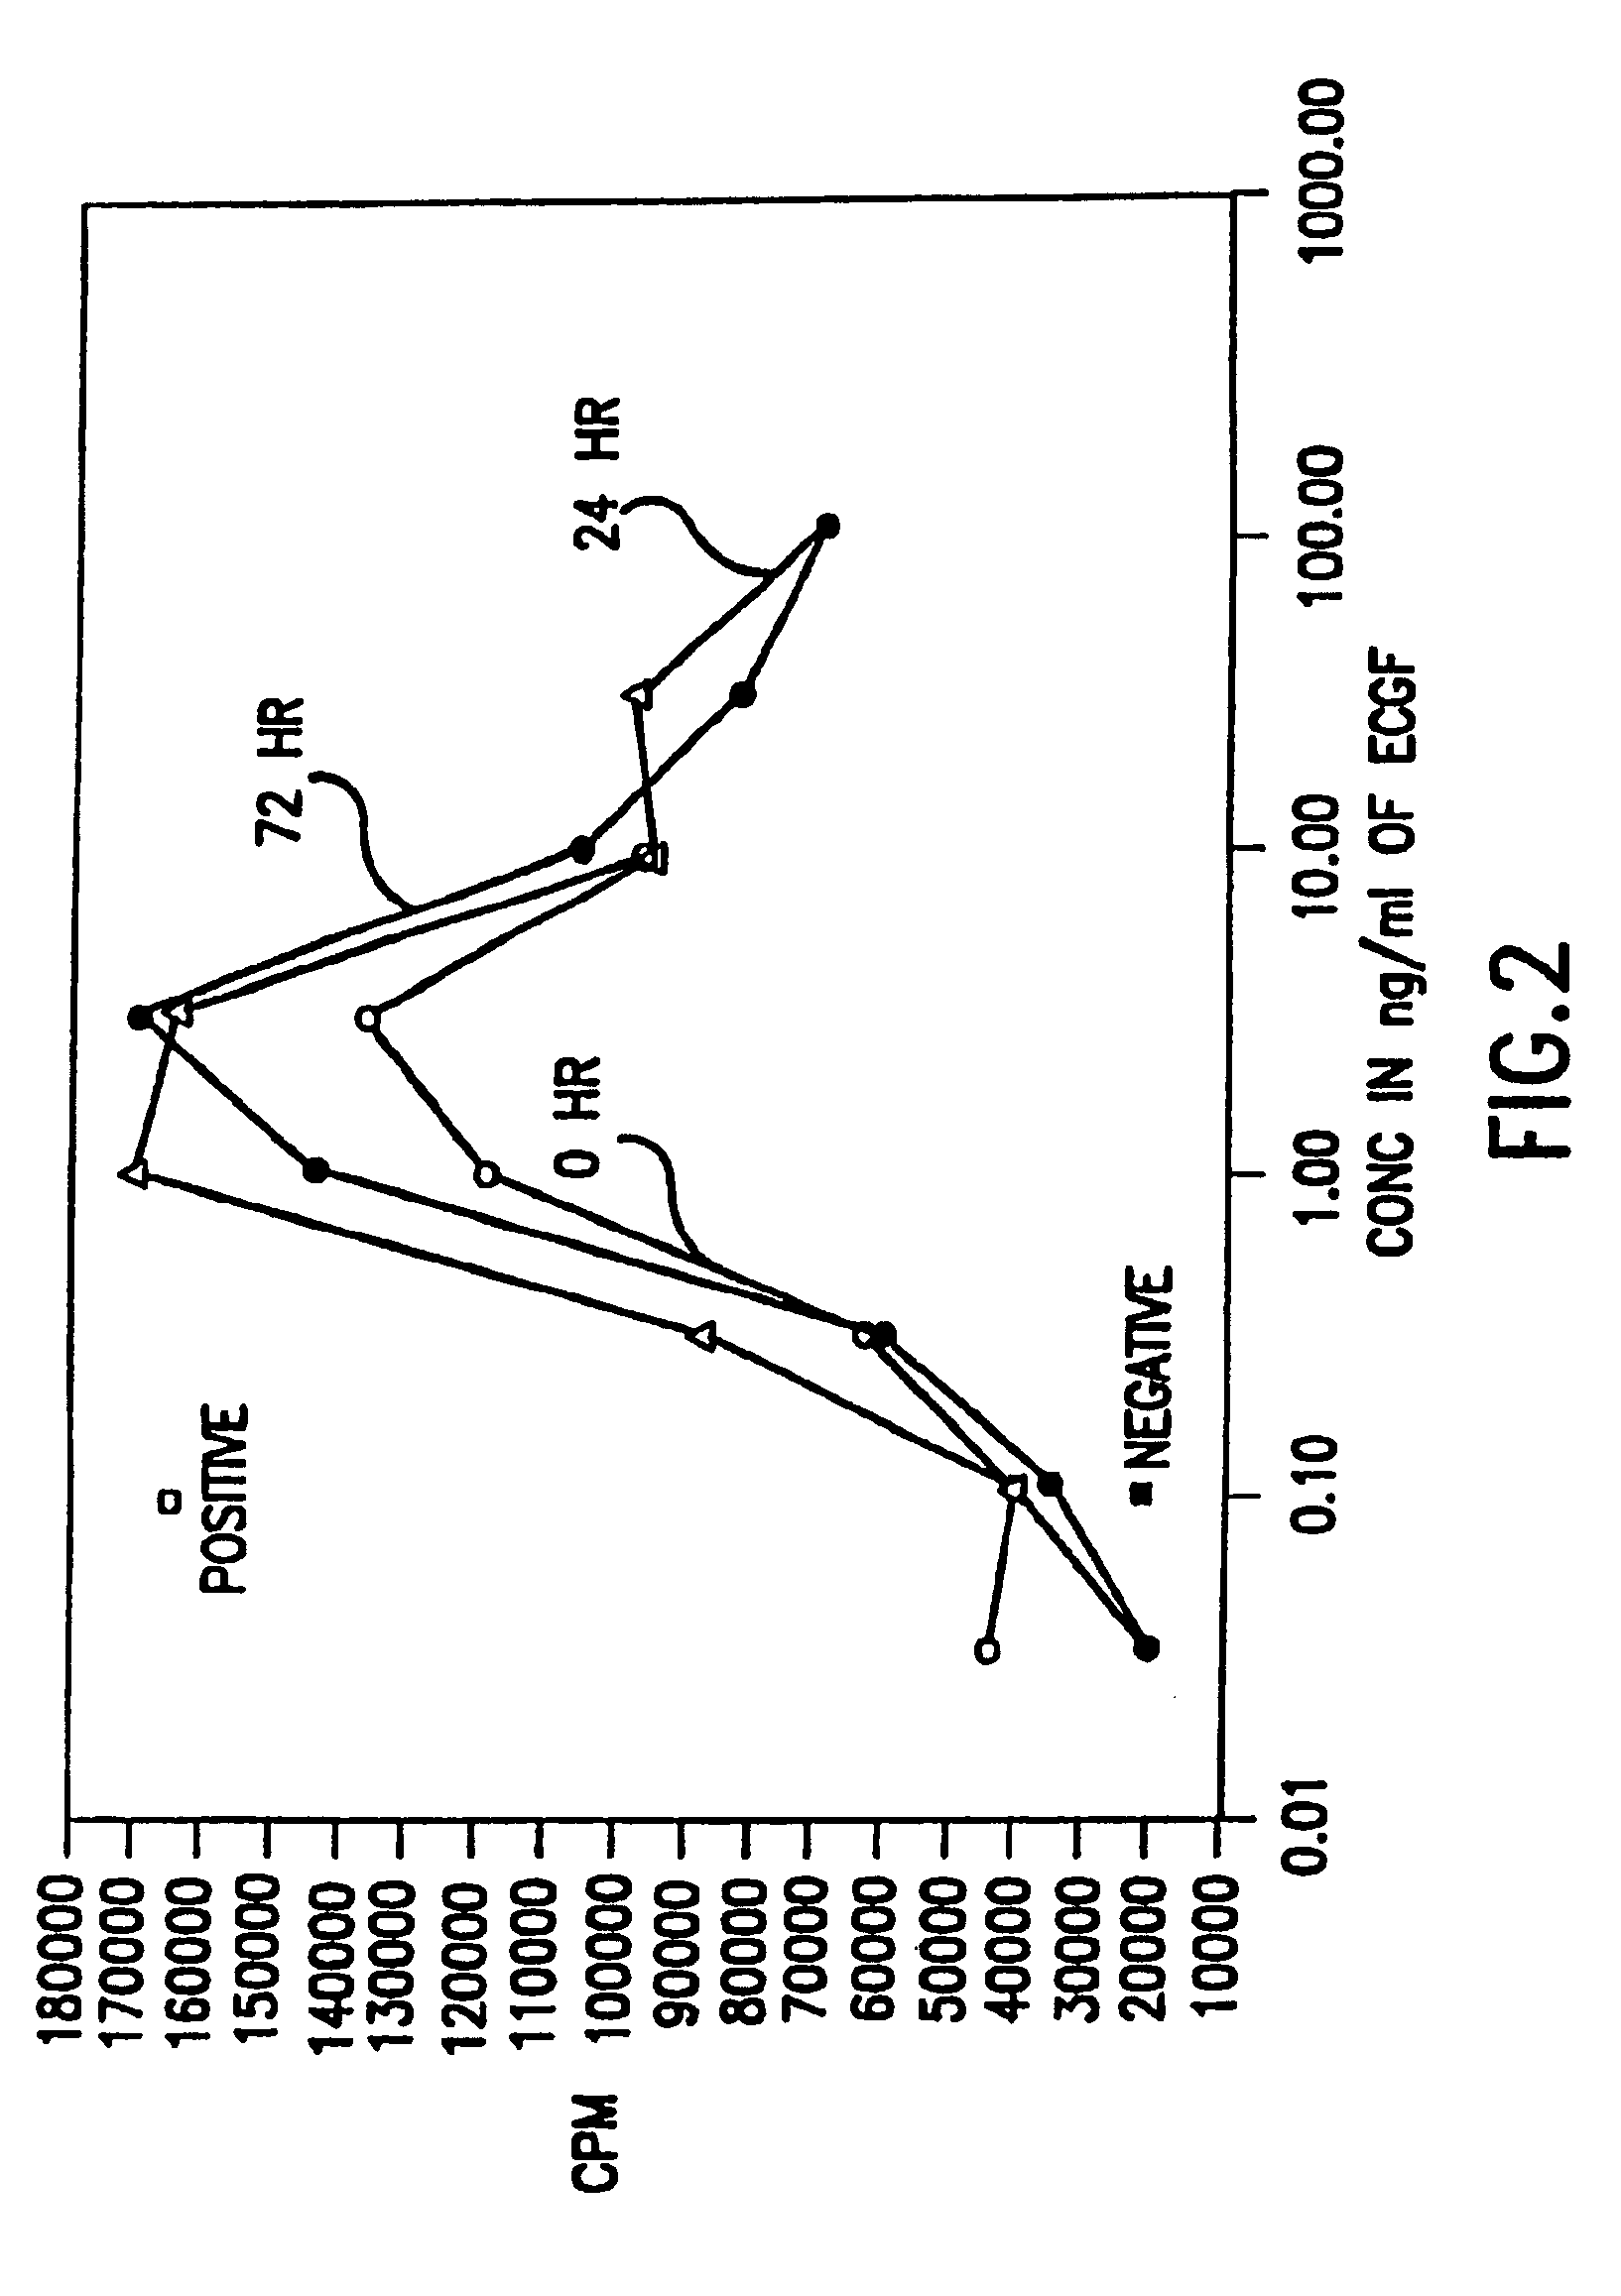 Supplemented and unsupplemented tissue sealants, methods of their production and use